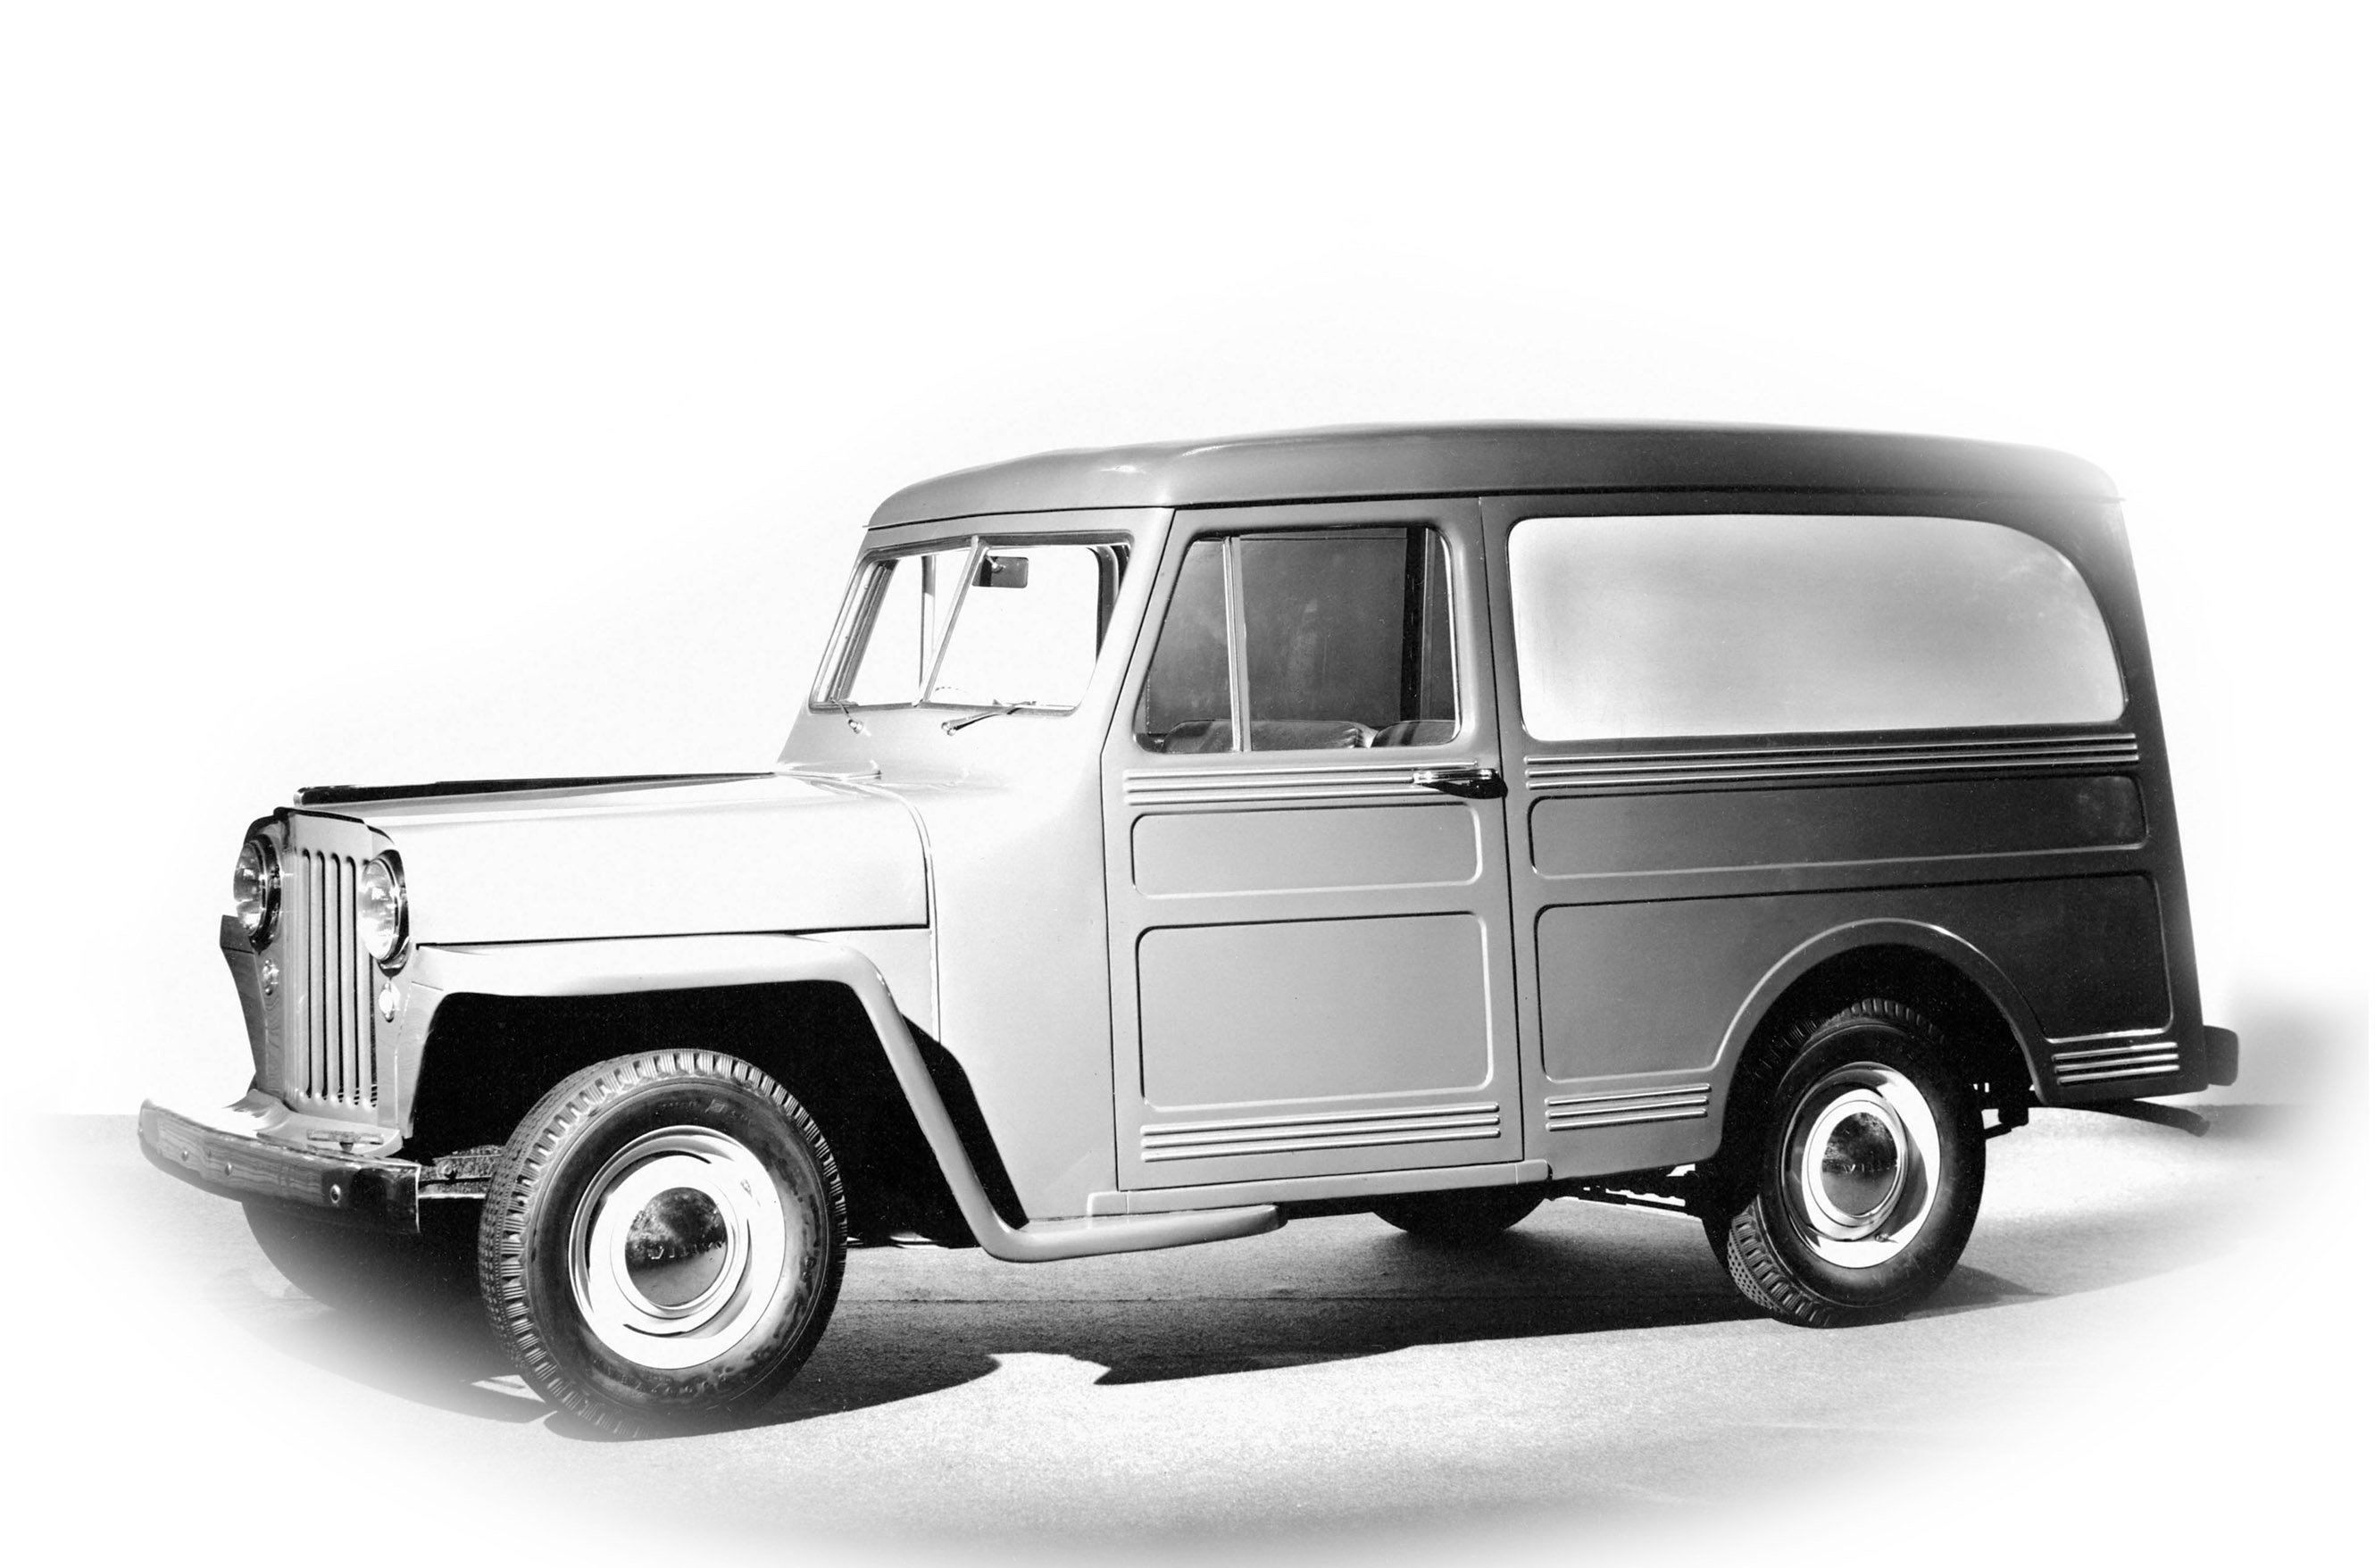 Willys Jeepster Panel Delivery